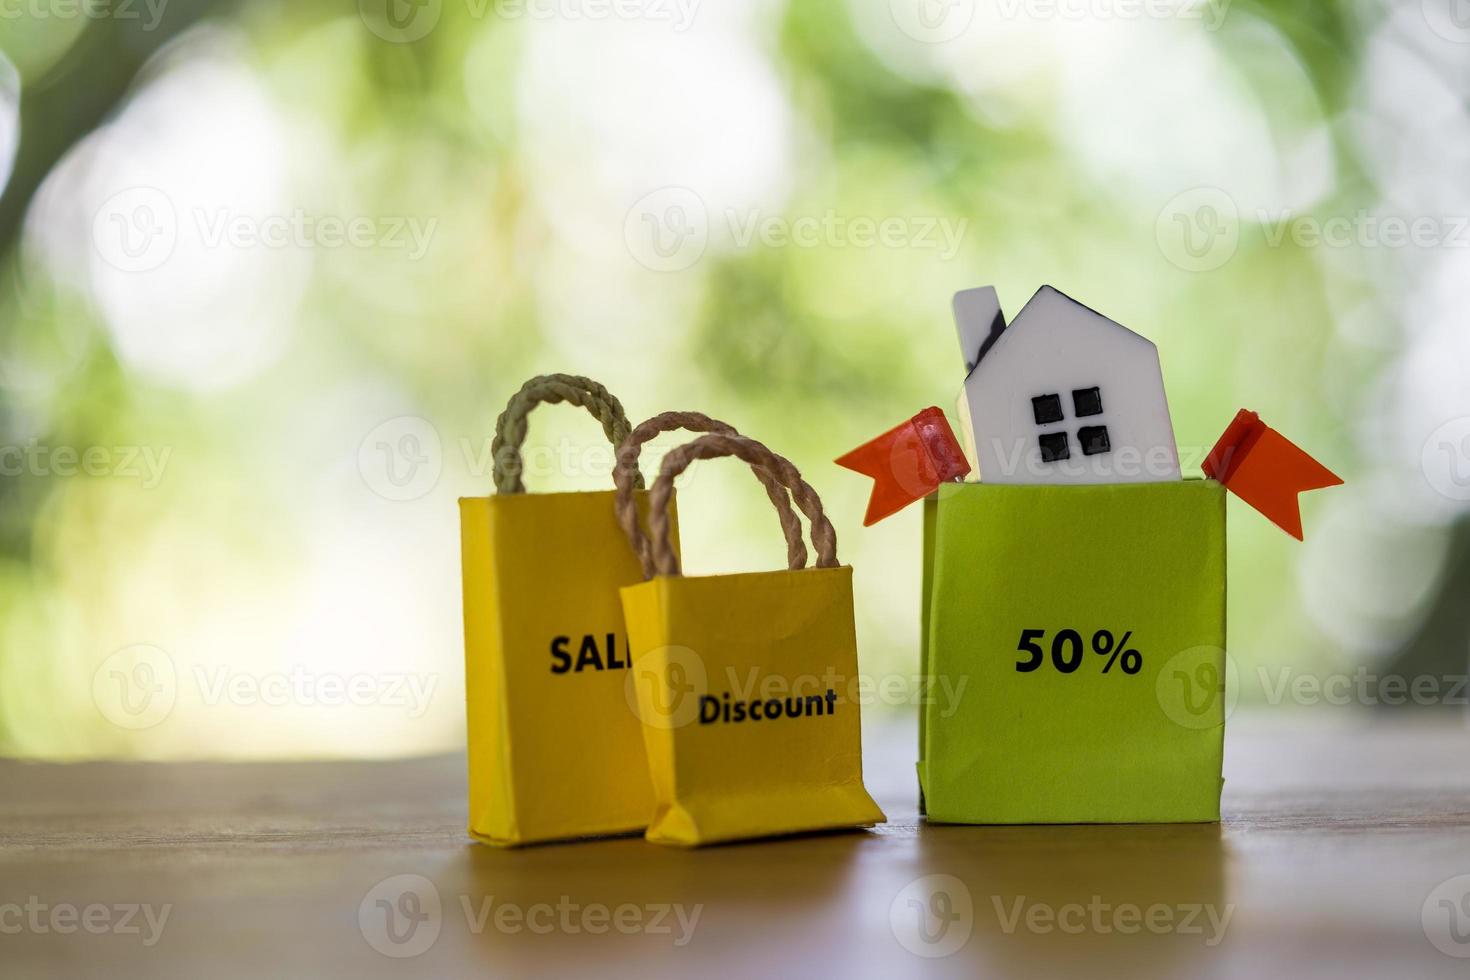 Concept of discounts on real estate. Discounts fifty percent. Low cost real estate. House in the paper bag shopping photo